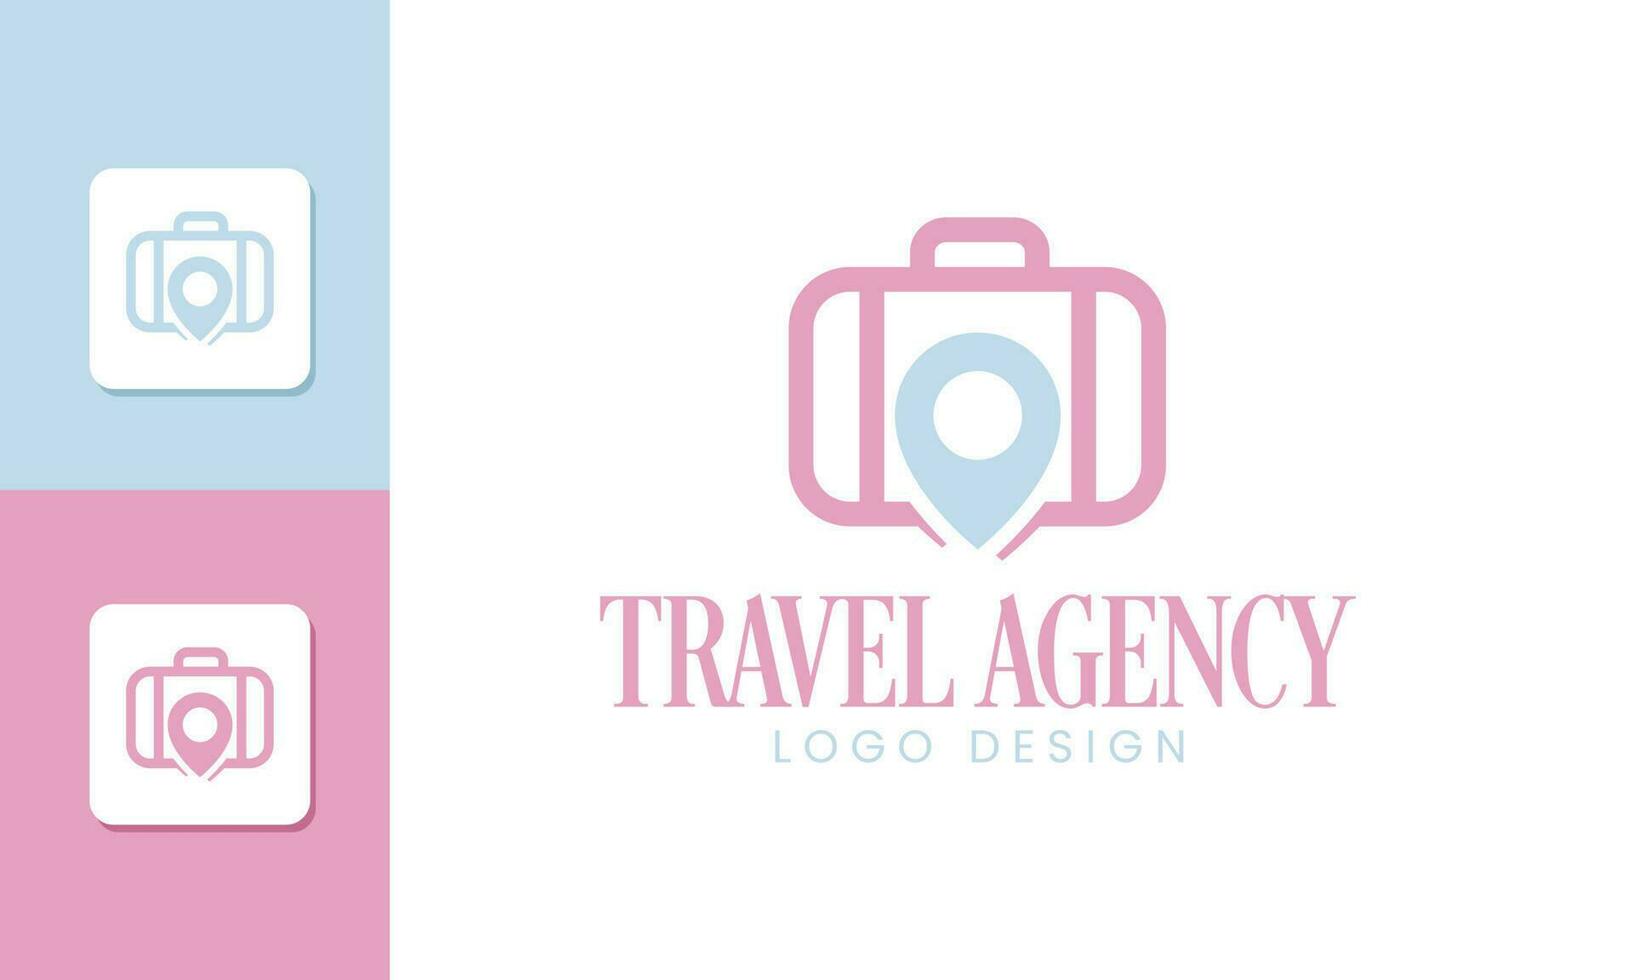 Travel Agency logo with bag icon vector